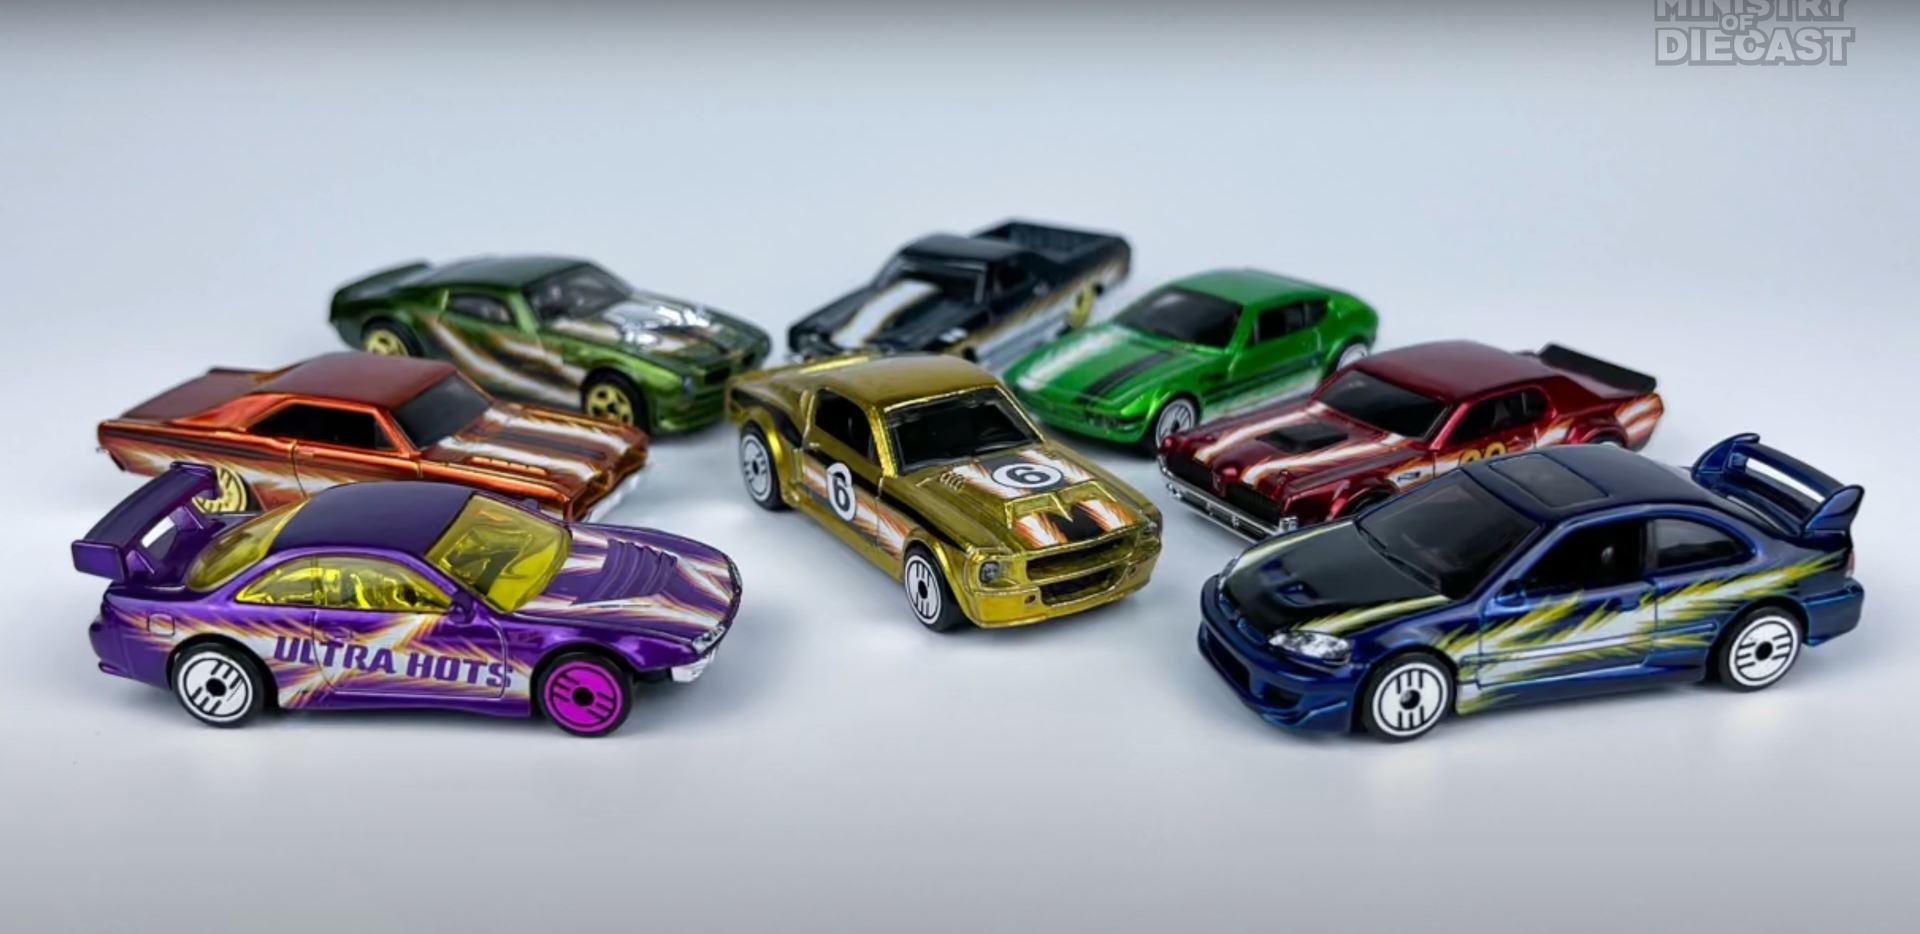 HOT WHEELS ULTIMATE GARAGE - The Toy Insider